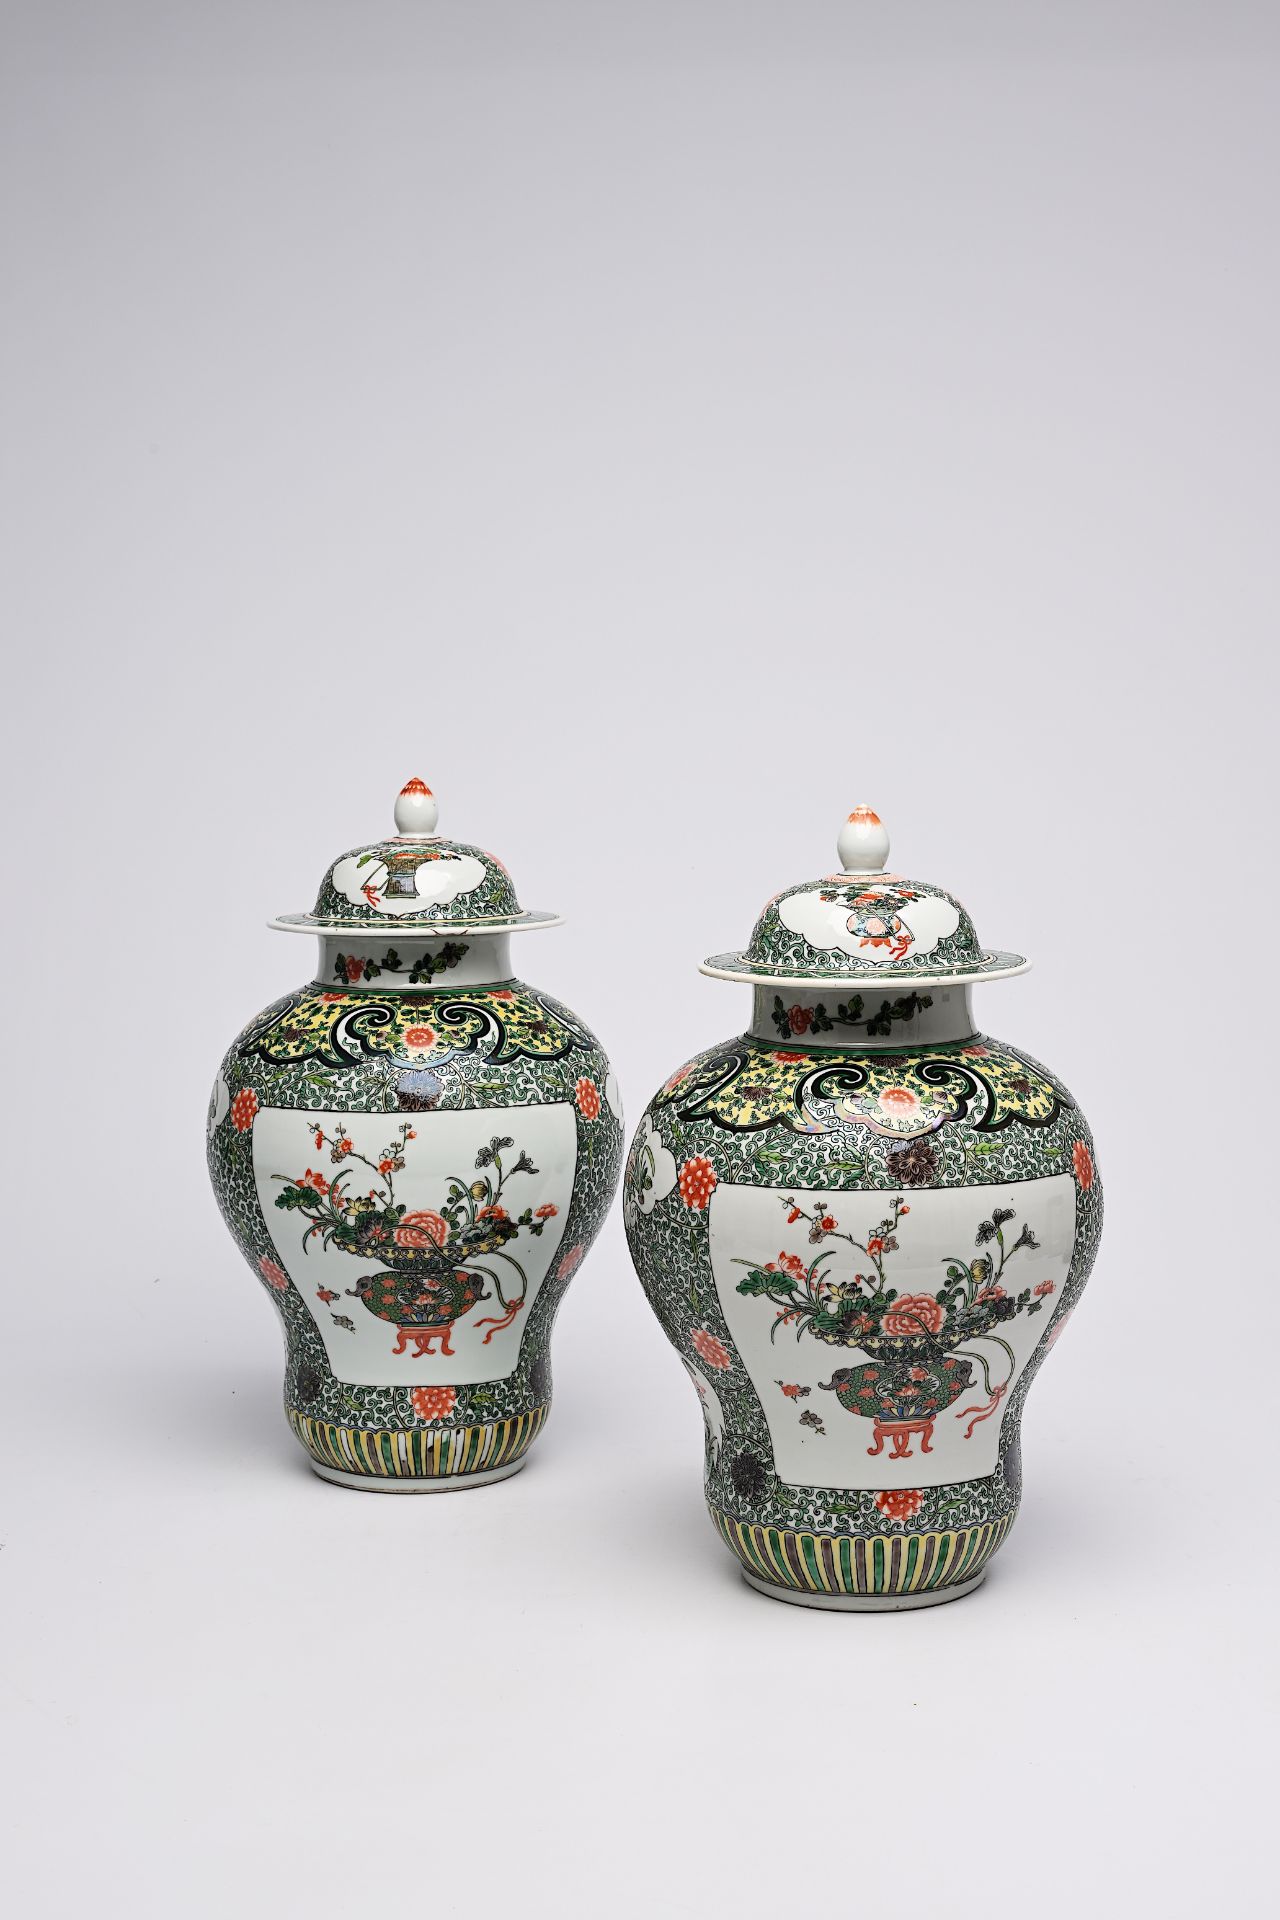 A pair of Chinese famille verte vases and covers with flower baskets and floral design, 19th C. - Image 14 of 16